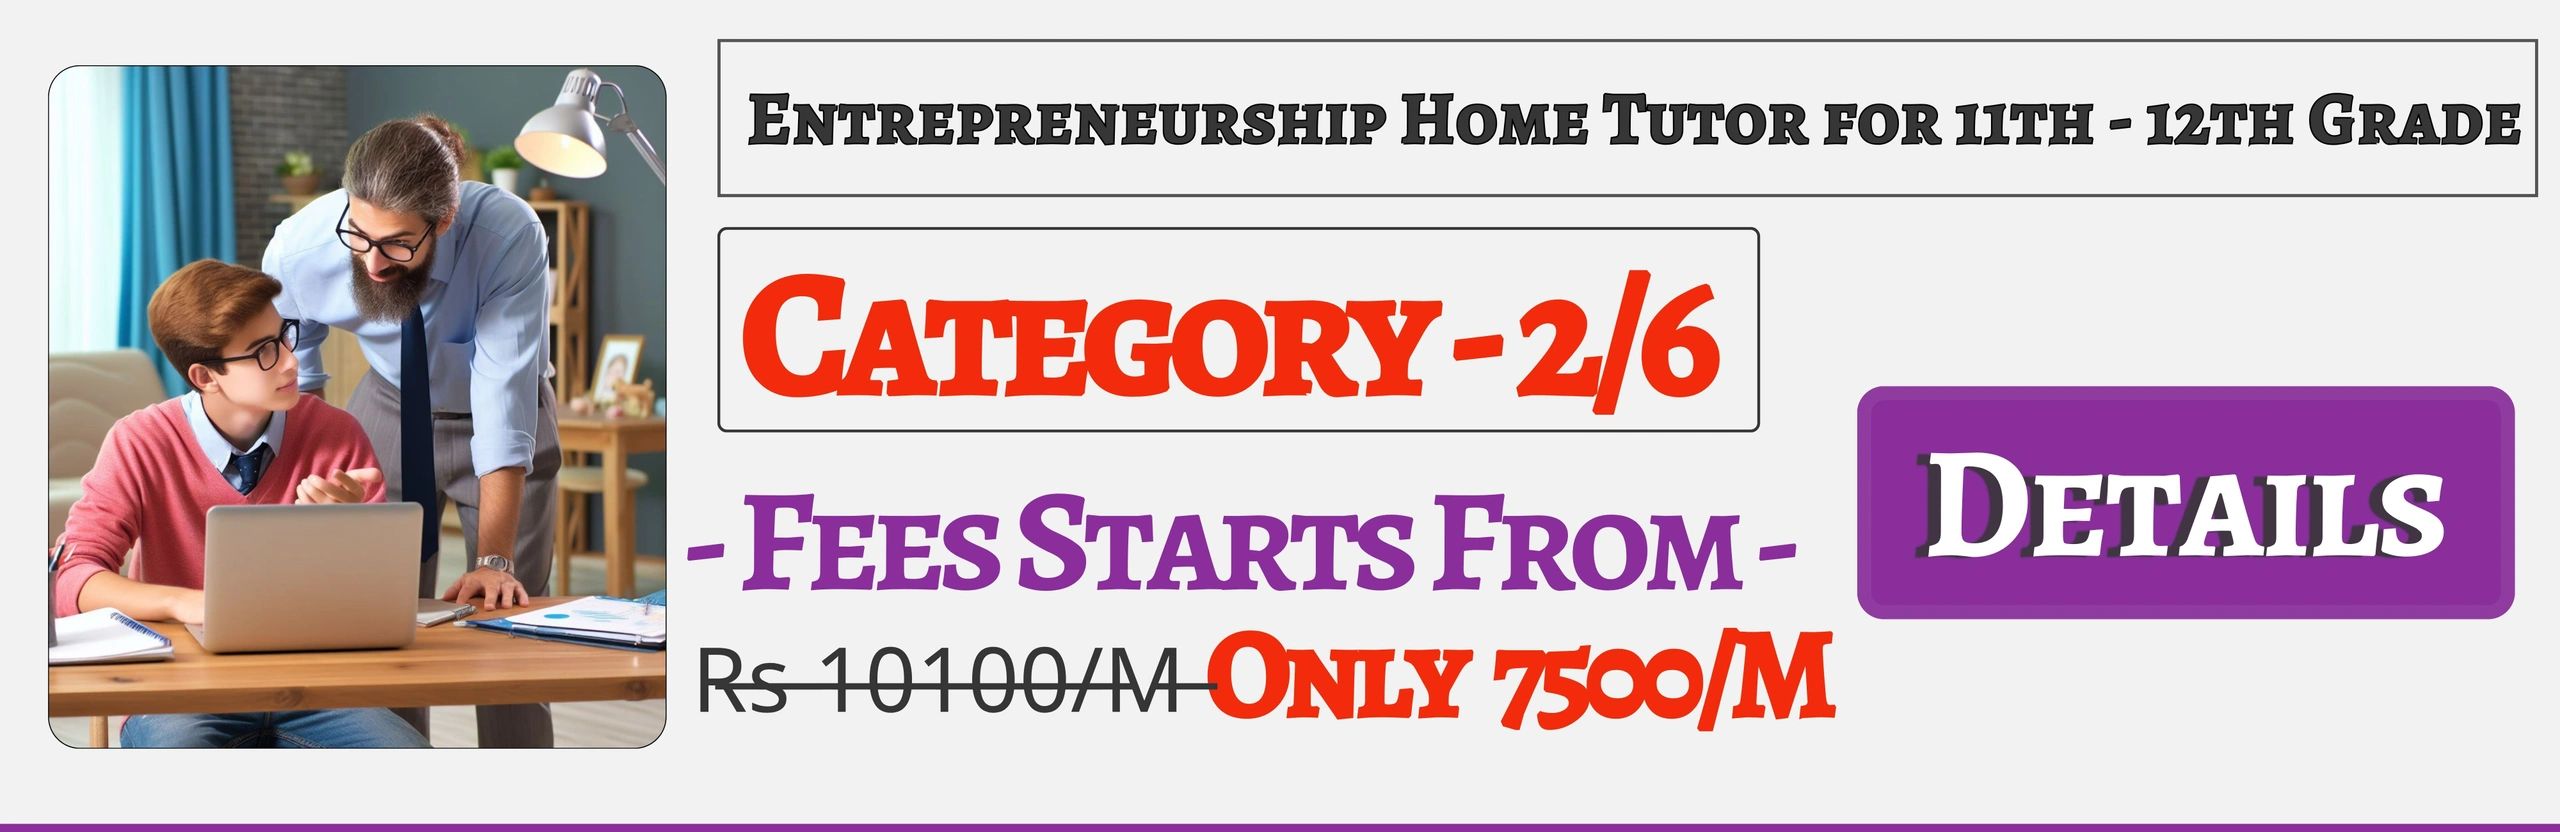 Book Best Nearby Entrepreneurship Home Tuition Tutors For 11th & 12th In Jaipur , Fees Only 7500/M